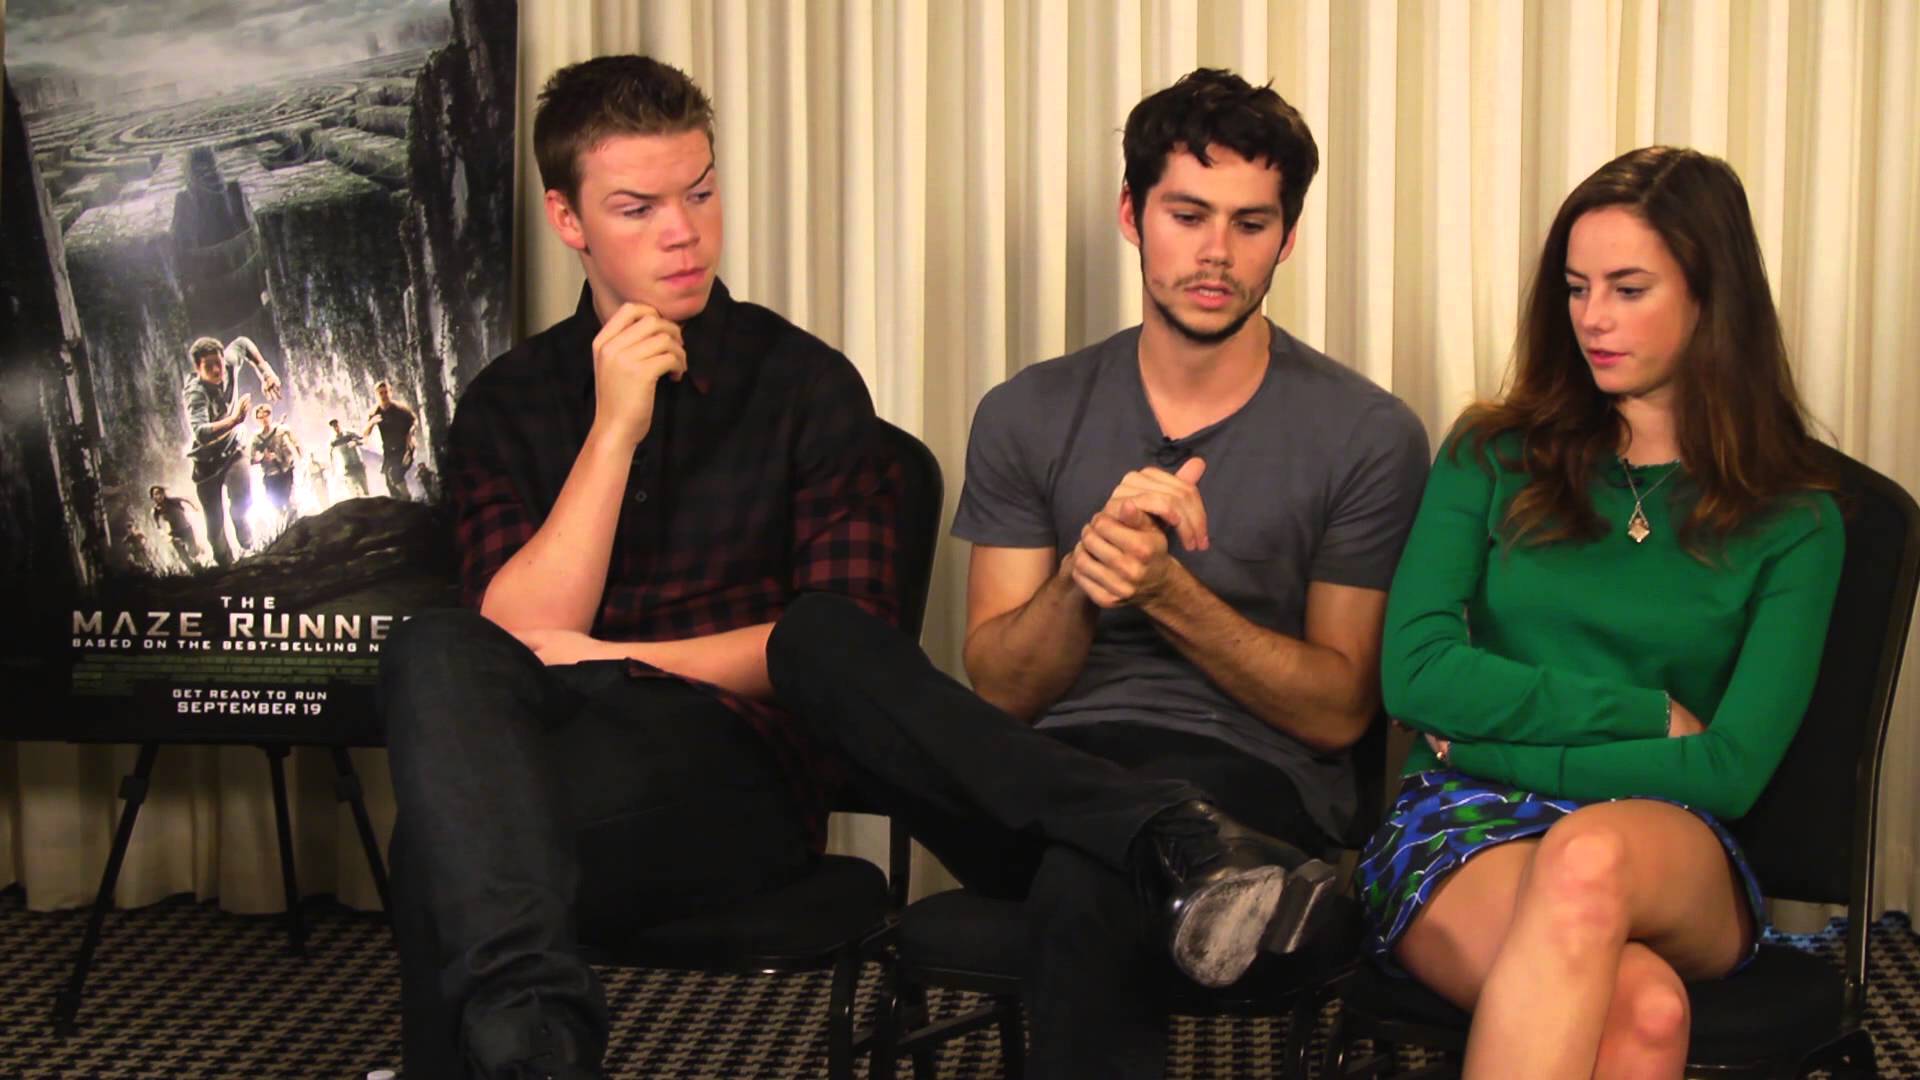 Will Poulter Fan » Watch: The Maze Runner cast interview for AMFM Magazine